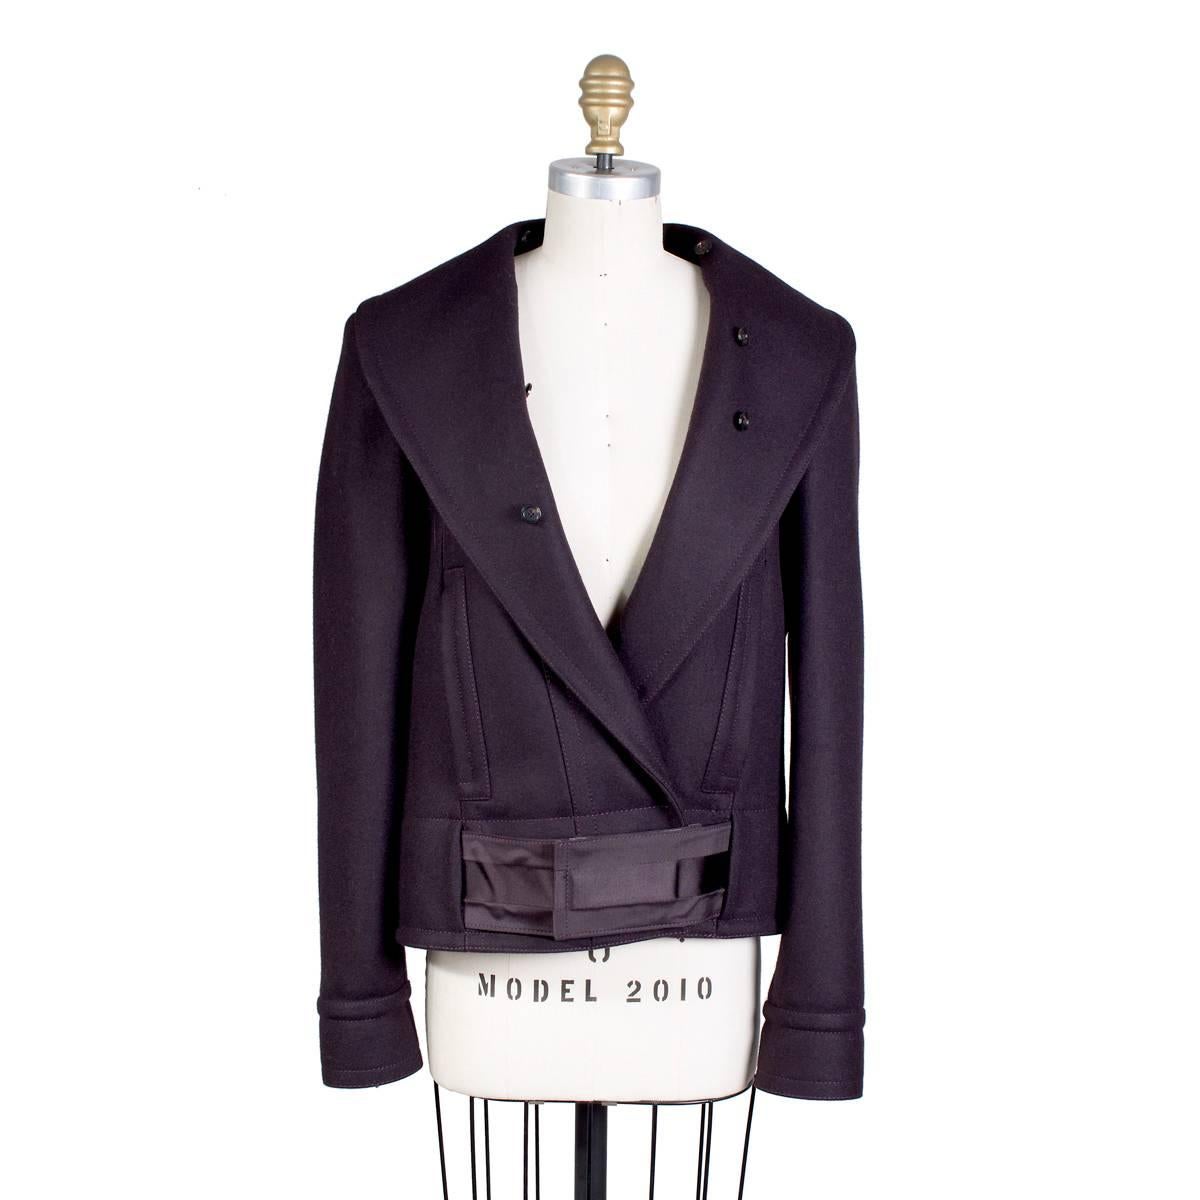 Jacket by Tom Ford for the Gucci F/W 2004-2005 RTW collection
Plum colored wool with matching fox fur around shoulders that detaches via buttons and loops
Cropped fit with velcro closure belt around waist
90% wool 10% cashmere
Condition: